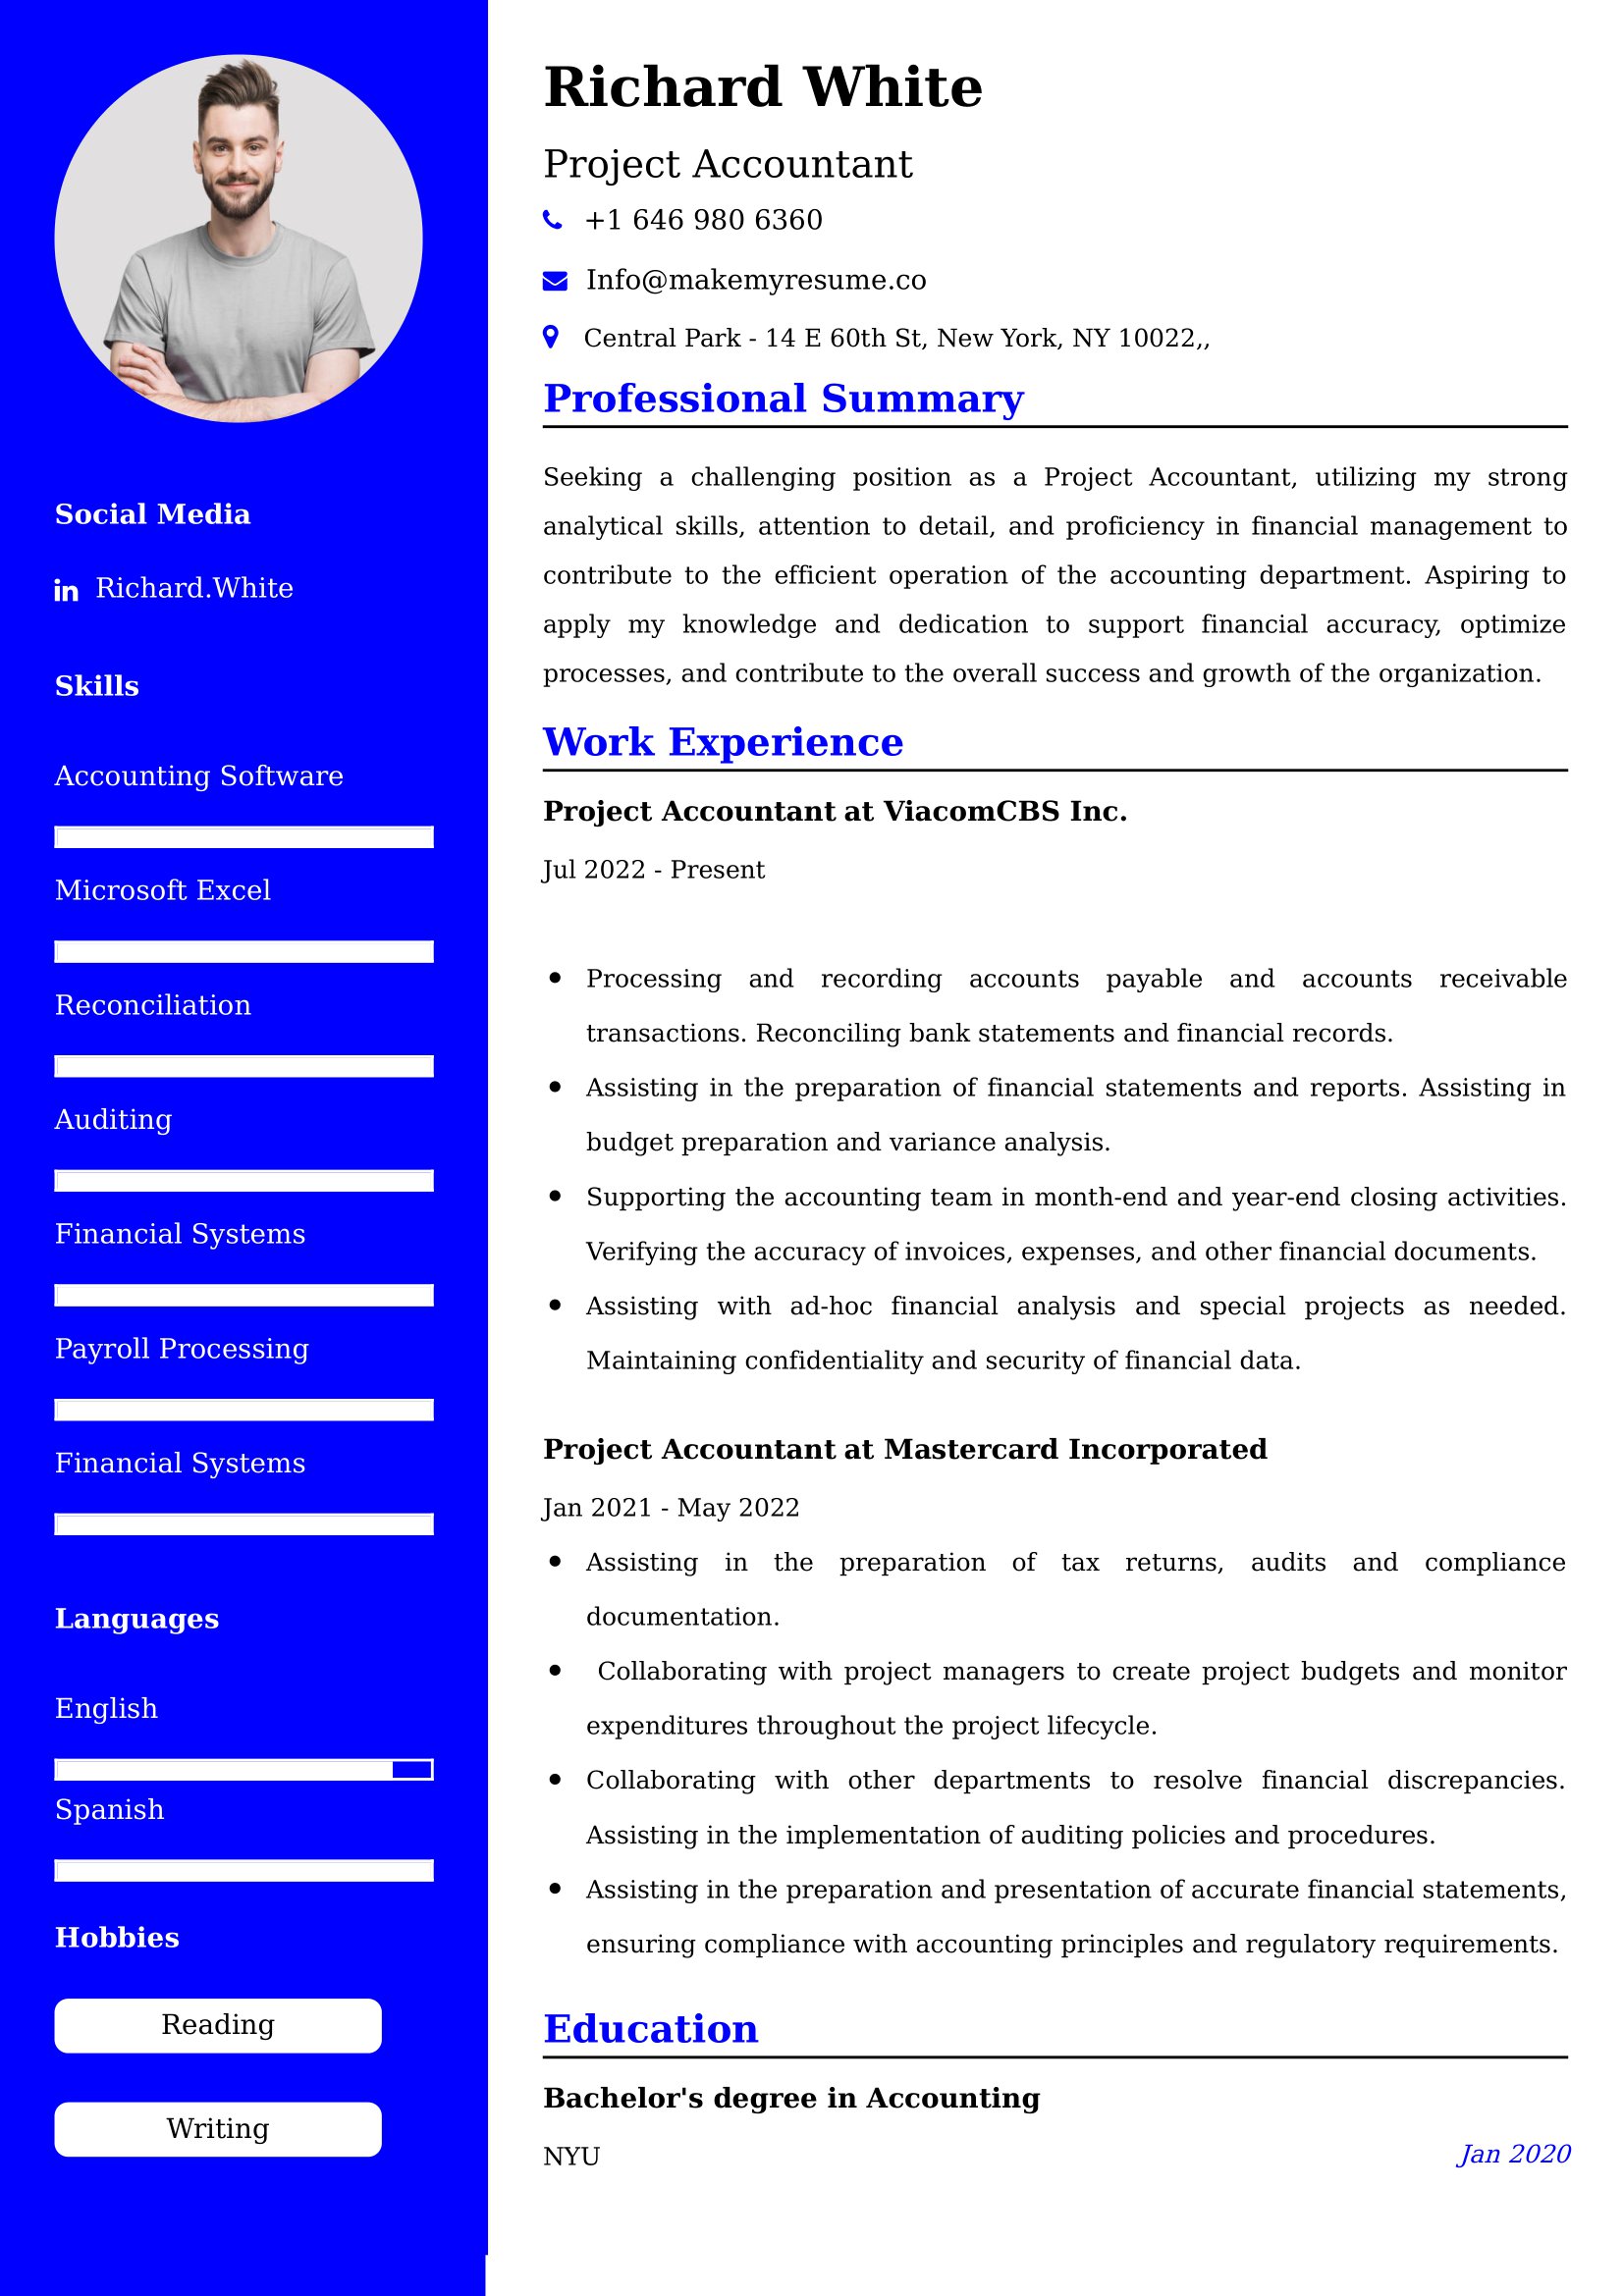 Project Accountant CV Examples Malaysia